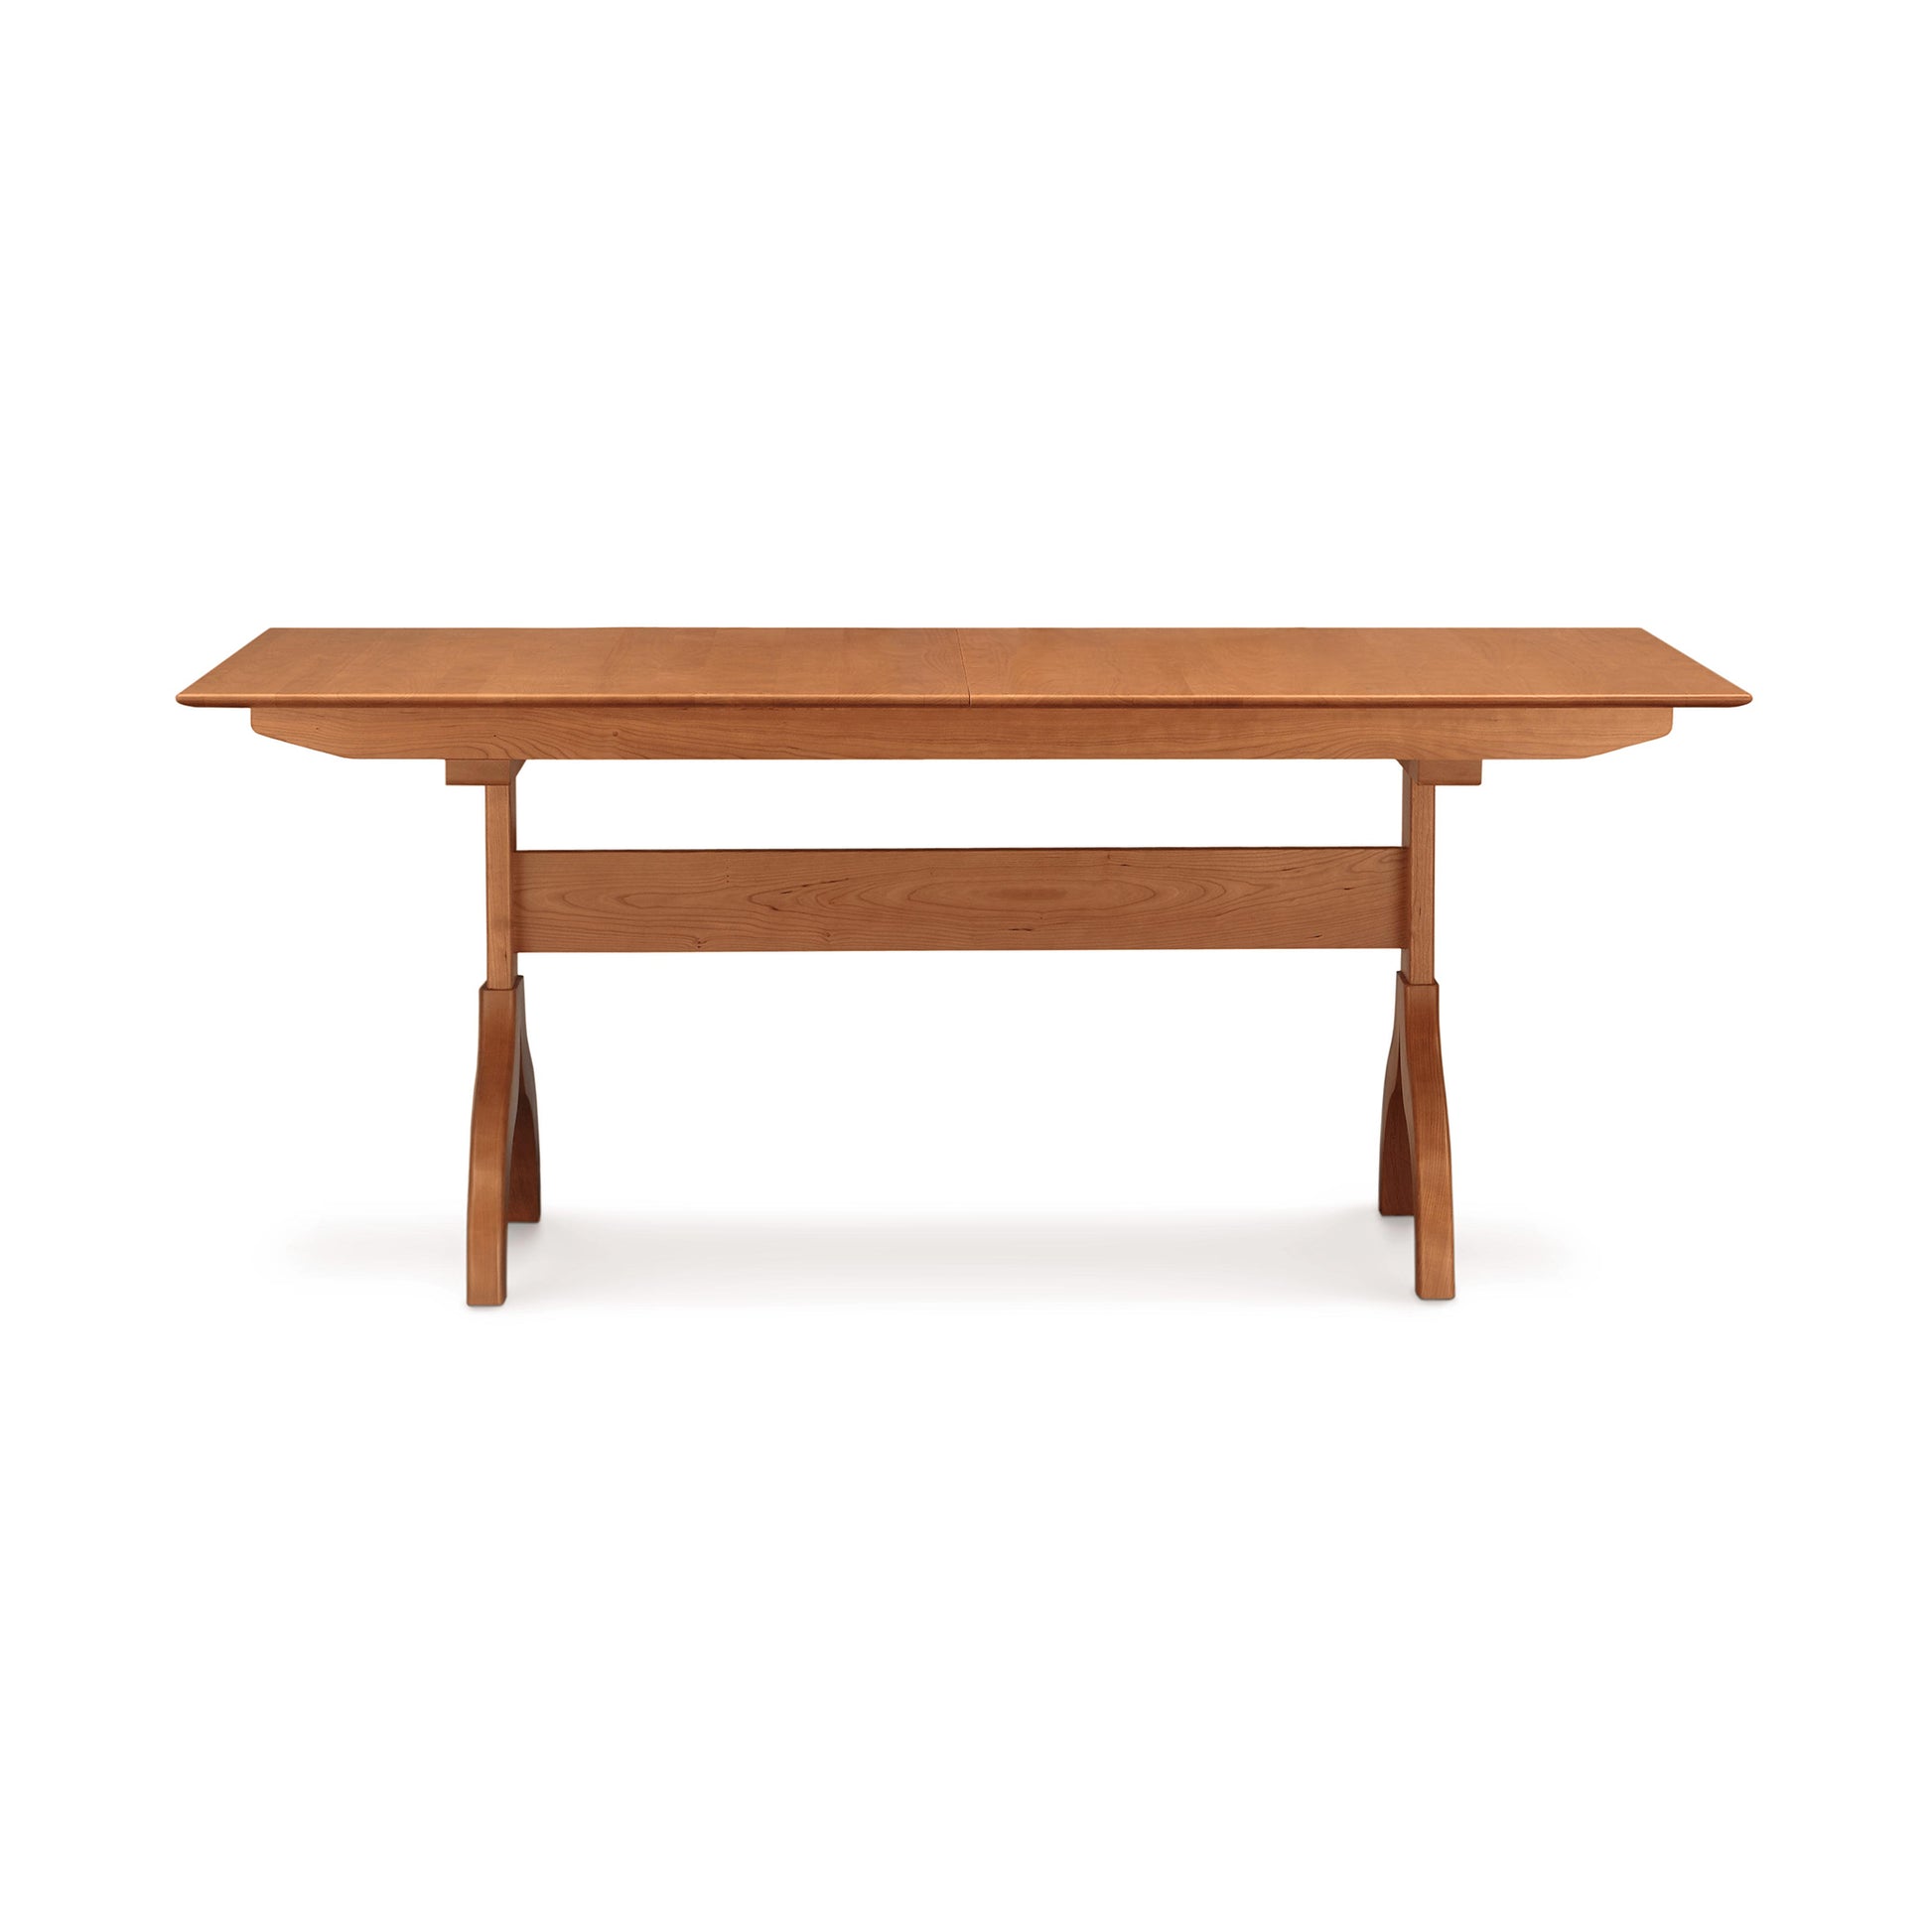 A Sarah Shaker Trestle Extension Table with extendable leaves against a white background. (Copeland Furniture)